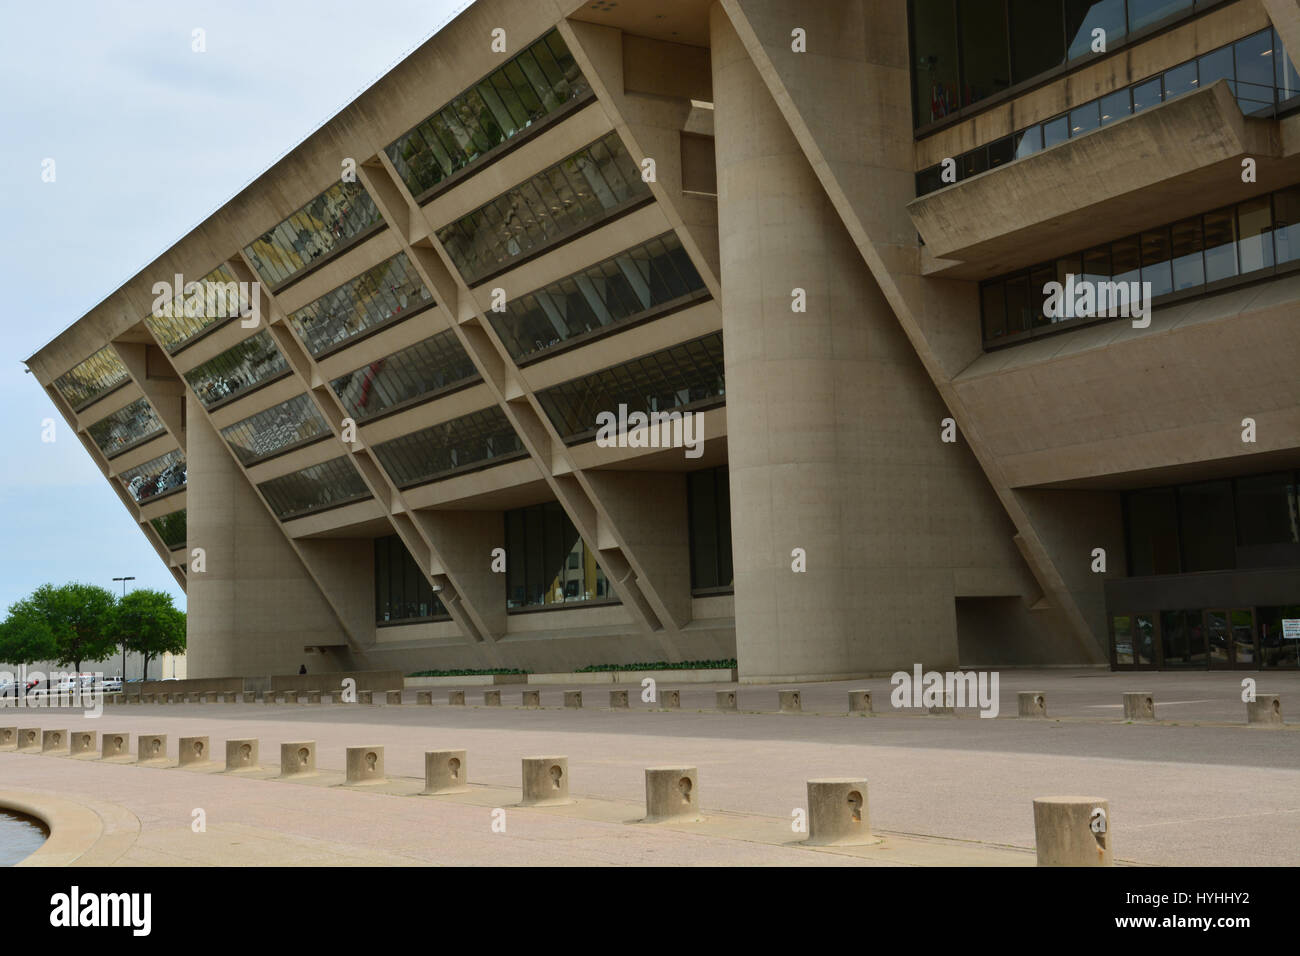 The modernist Dallas City Hall was built in 1978 and designed by I.M. Pei. Stock Photo